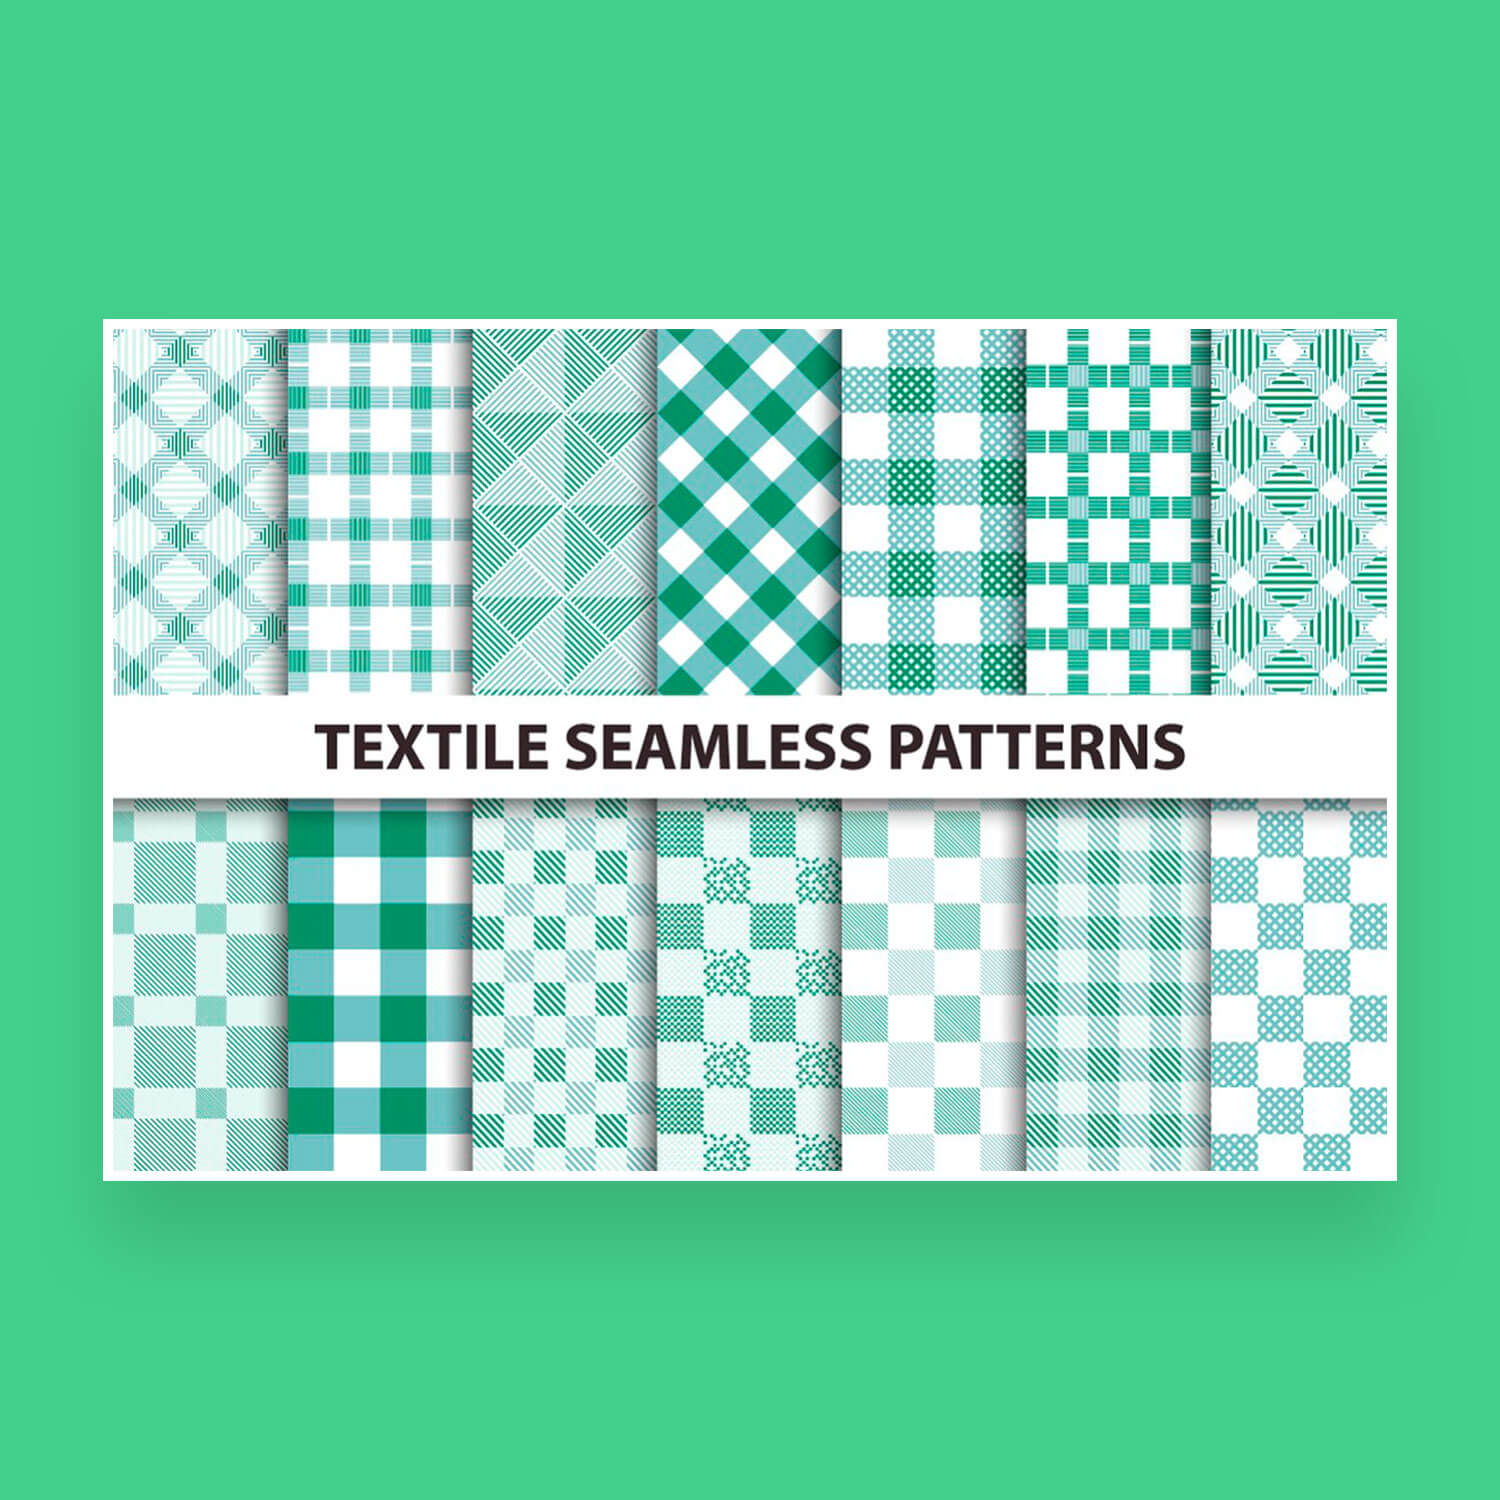 Fourteen examples of textile seamless patterns.